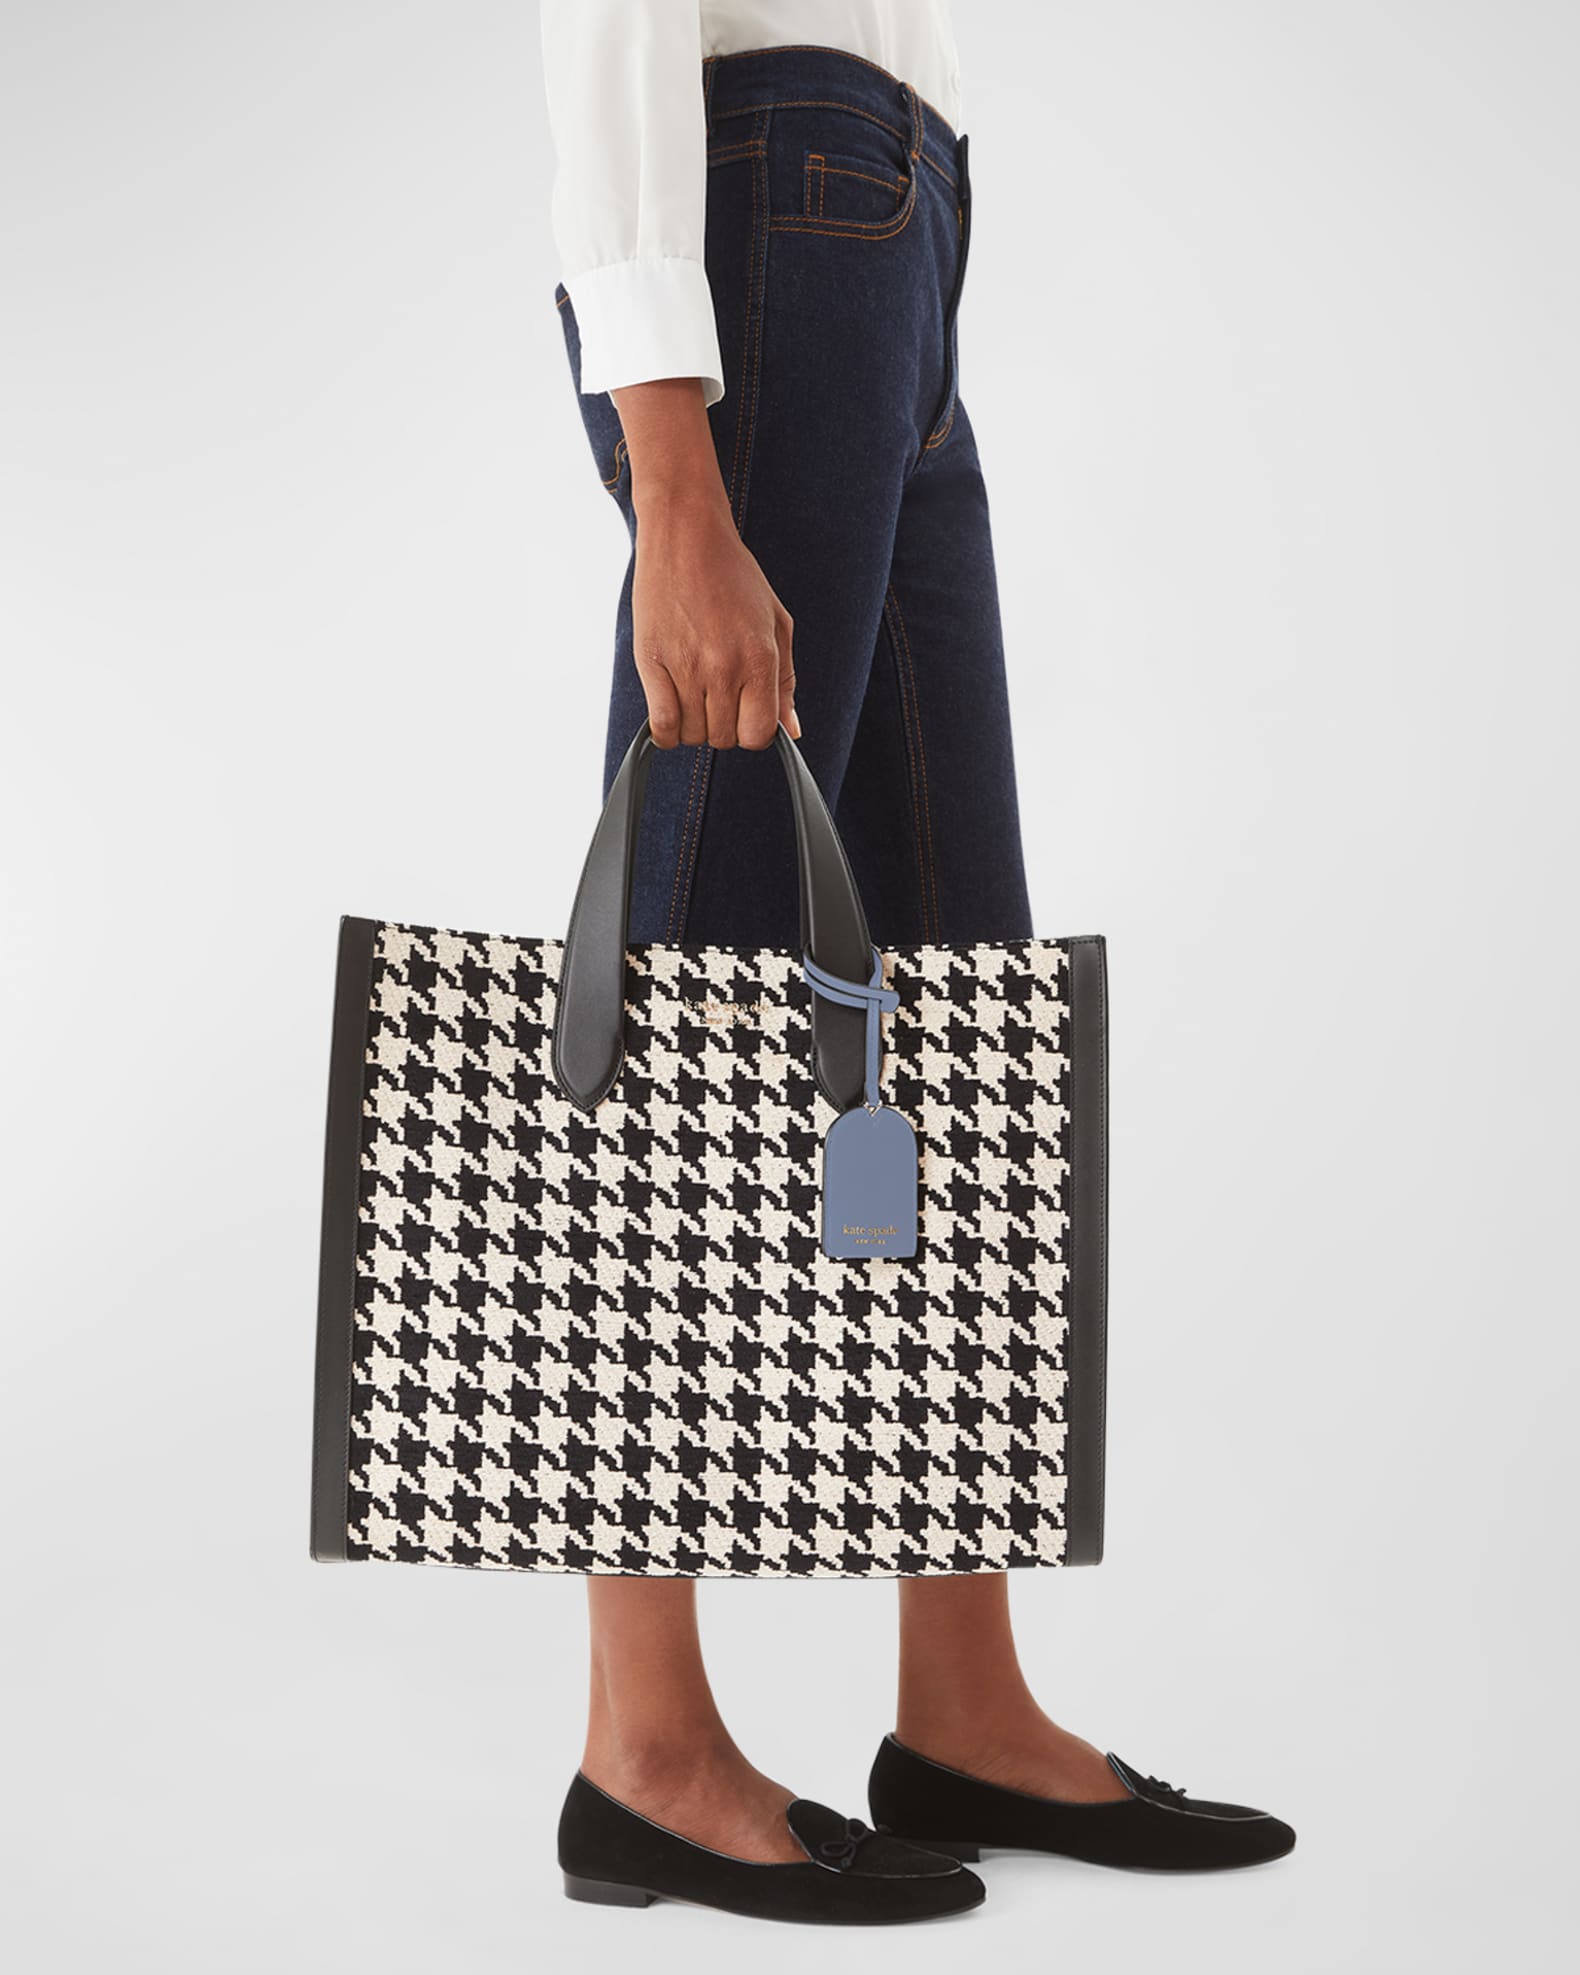 kate spade new york large houndstooth tote bag | Neiman Marcus